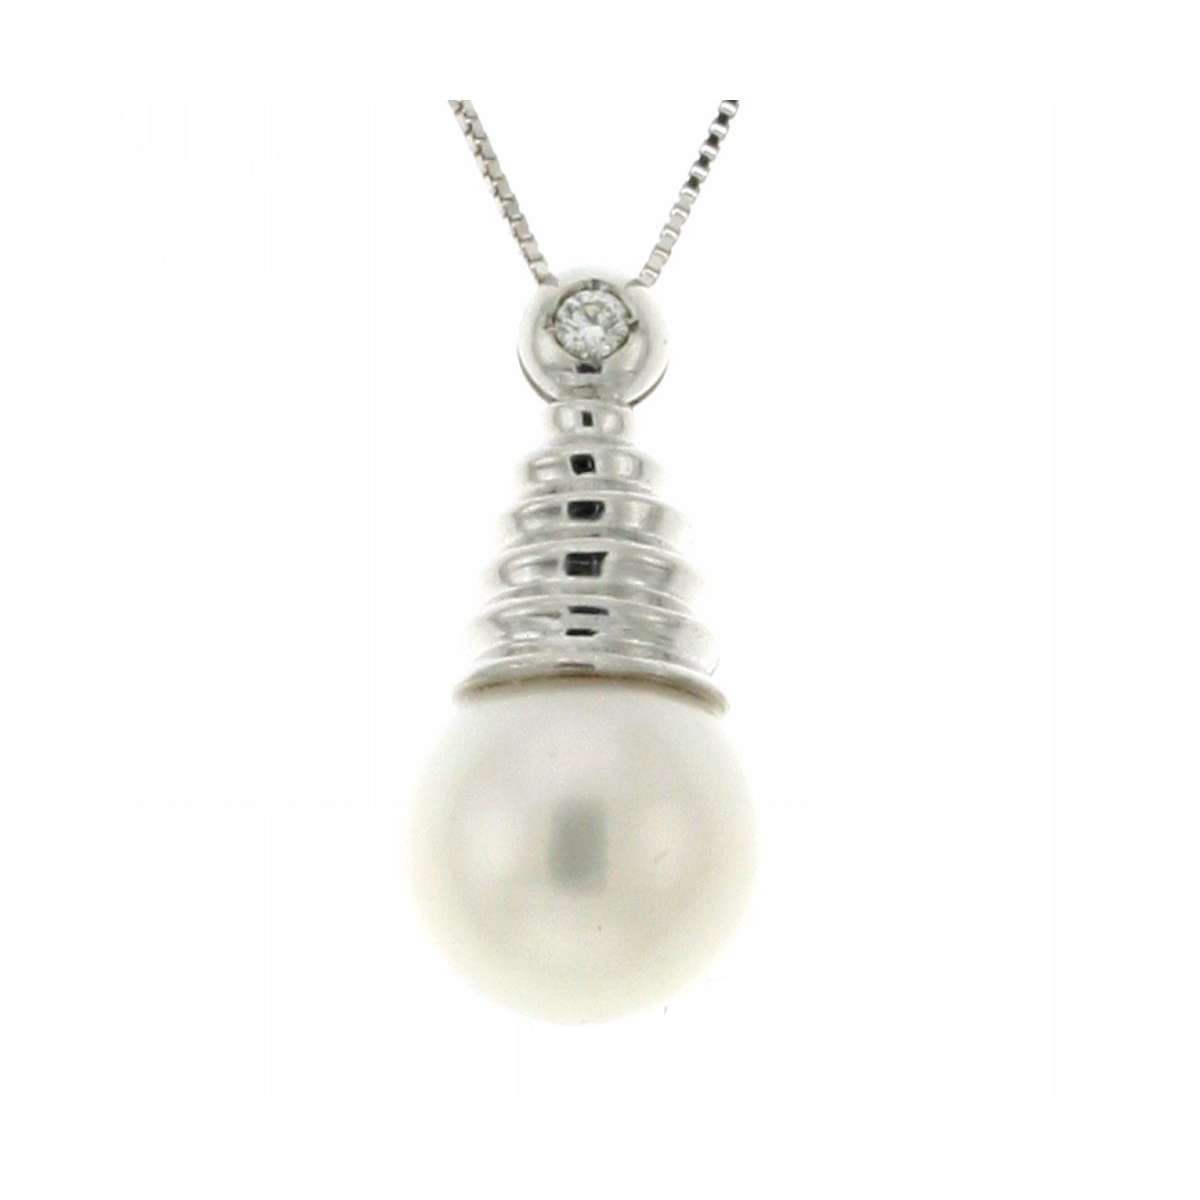 Necklace with a large pearl 11.35mm 0.04 carats diamonds G-VS1